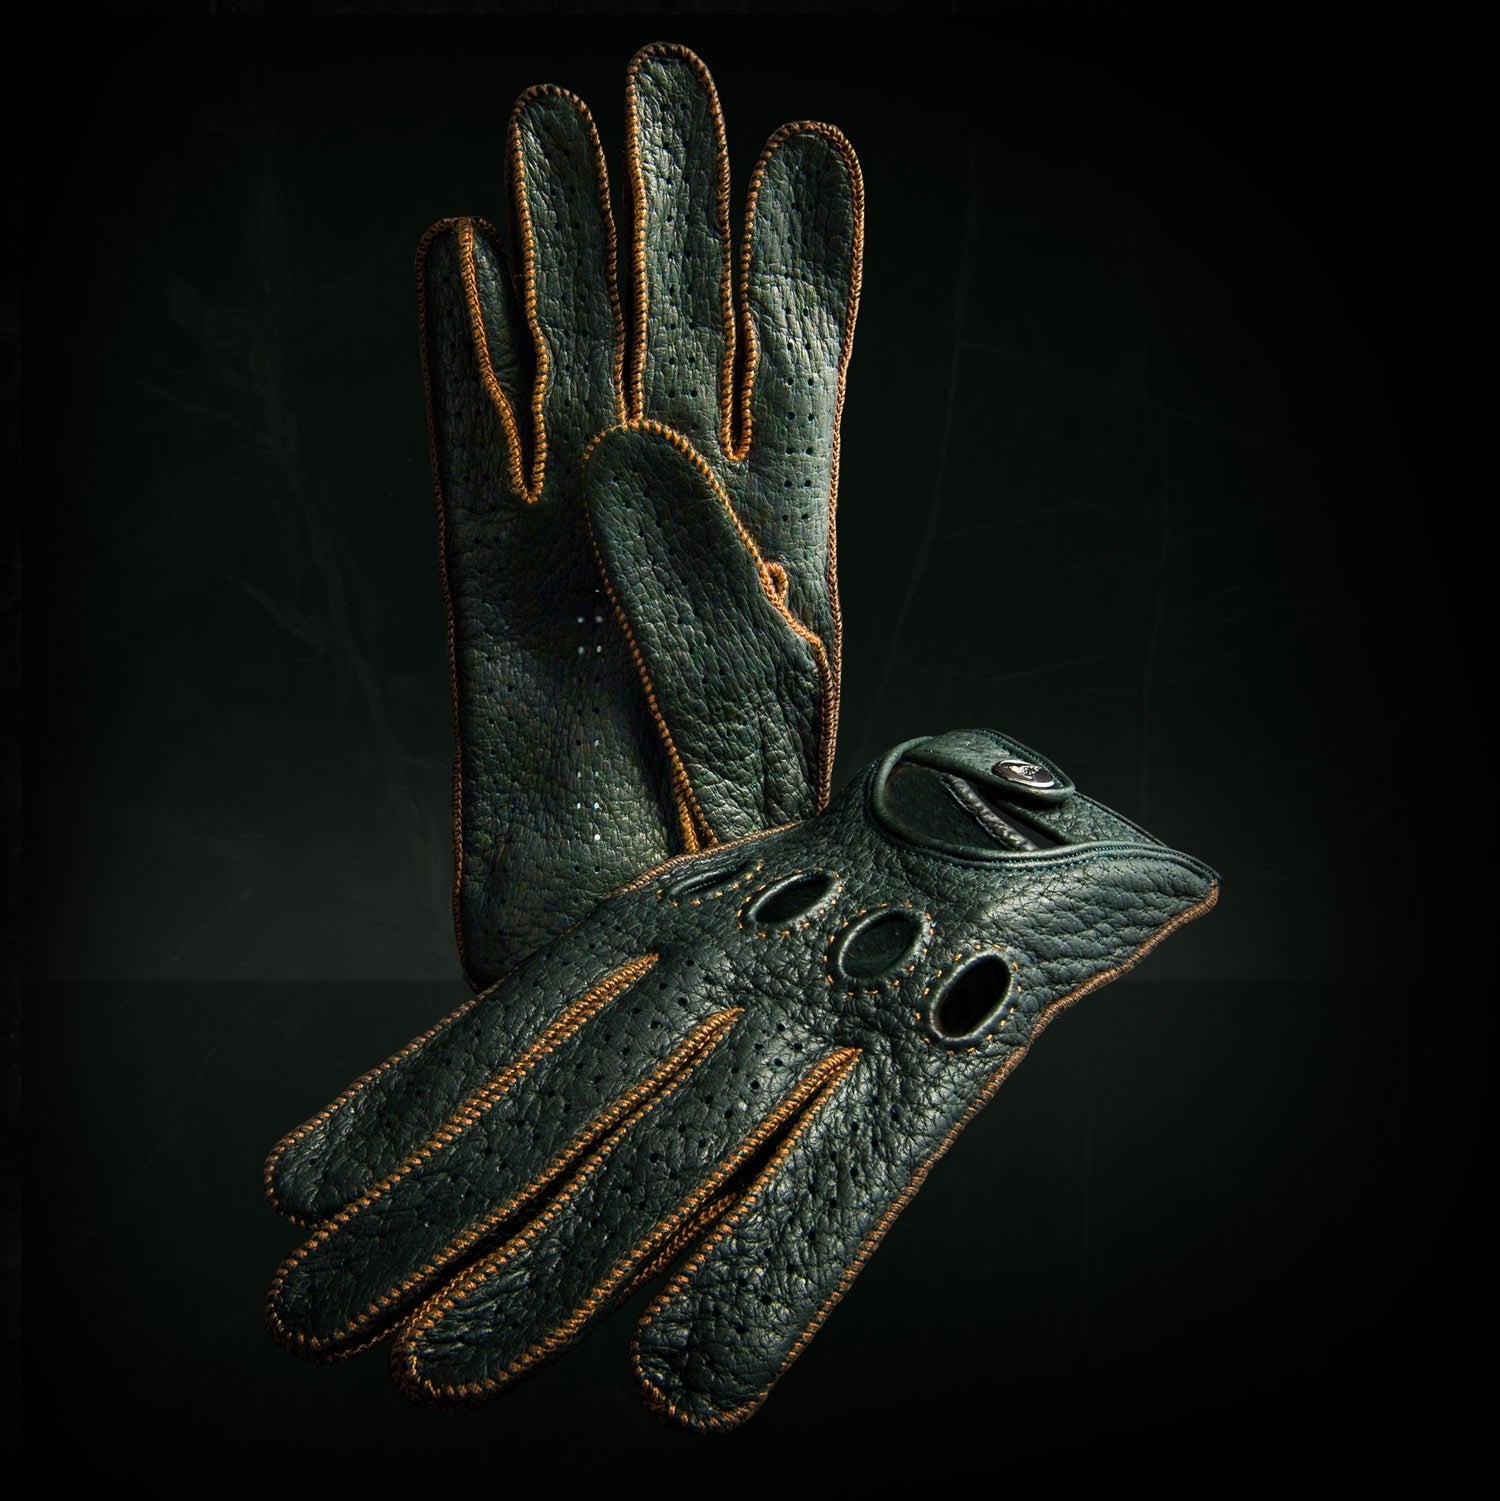 Corsa Verde Type 2 driving gloves - made on request